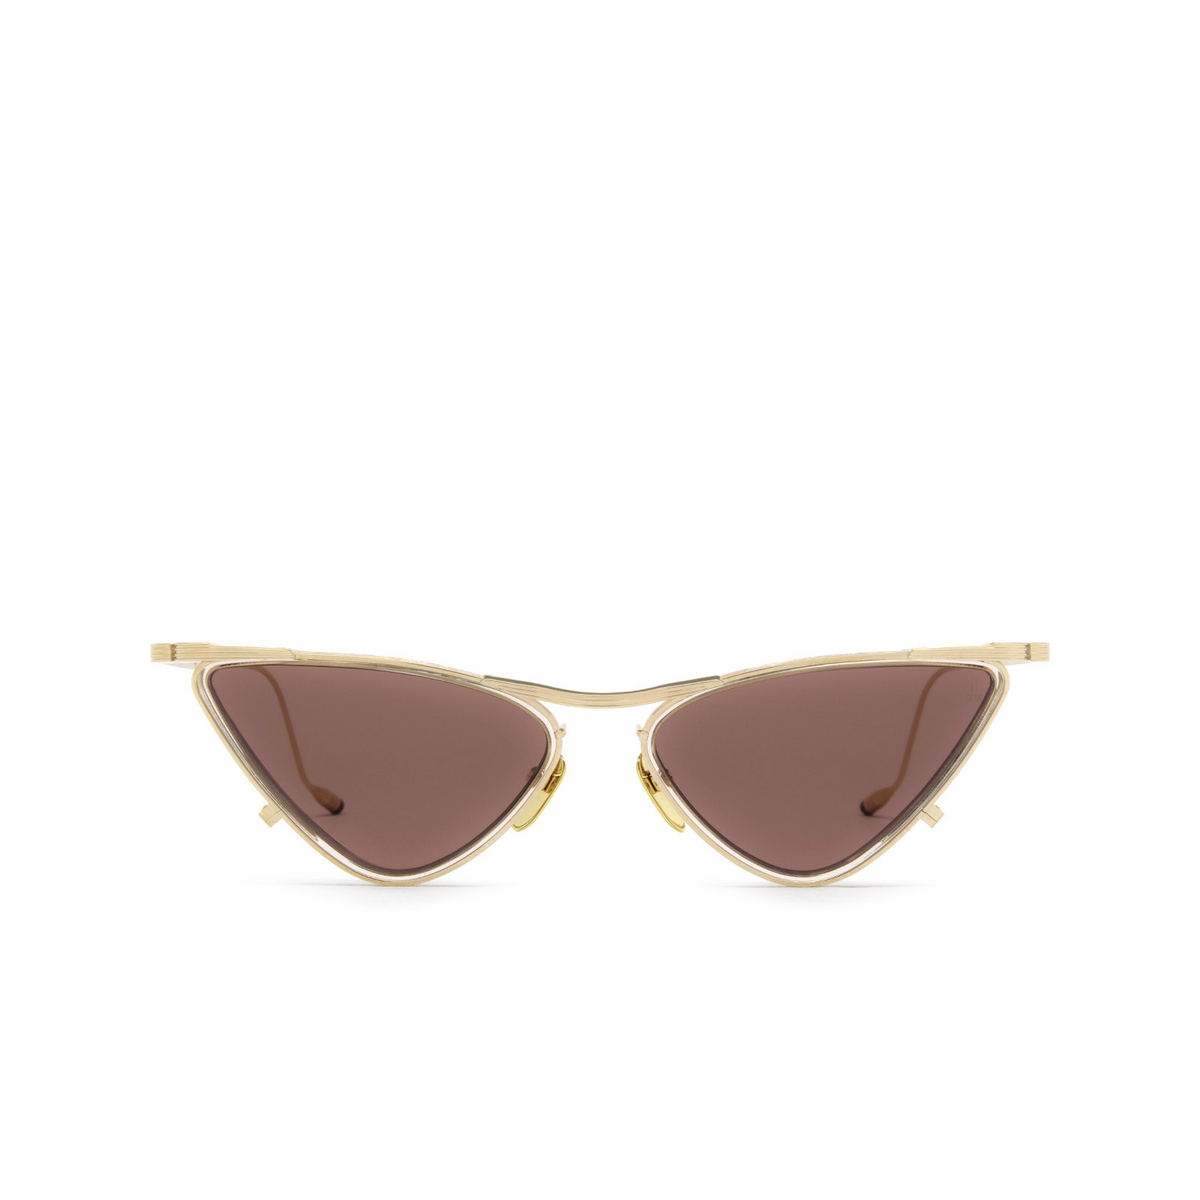 Jacques Marie Mage NIKI Sunglasses NUDE 2 - front view